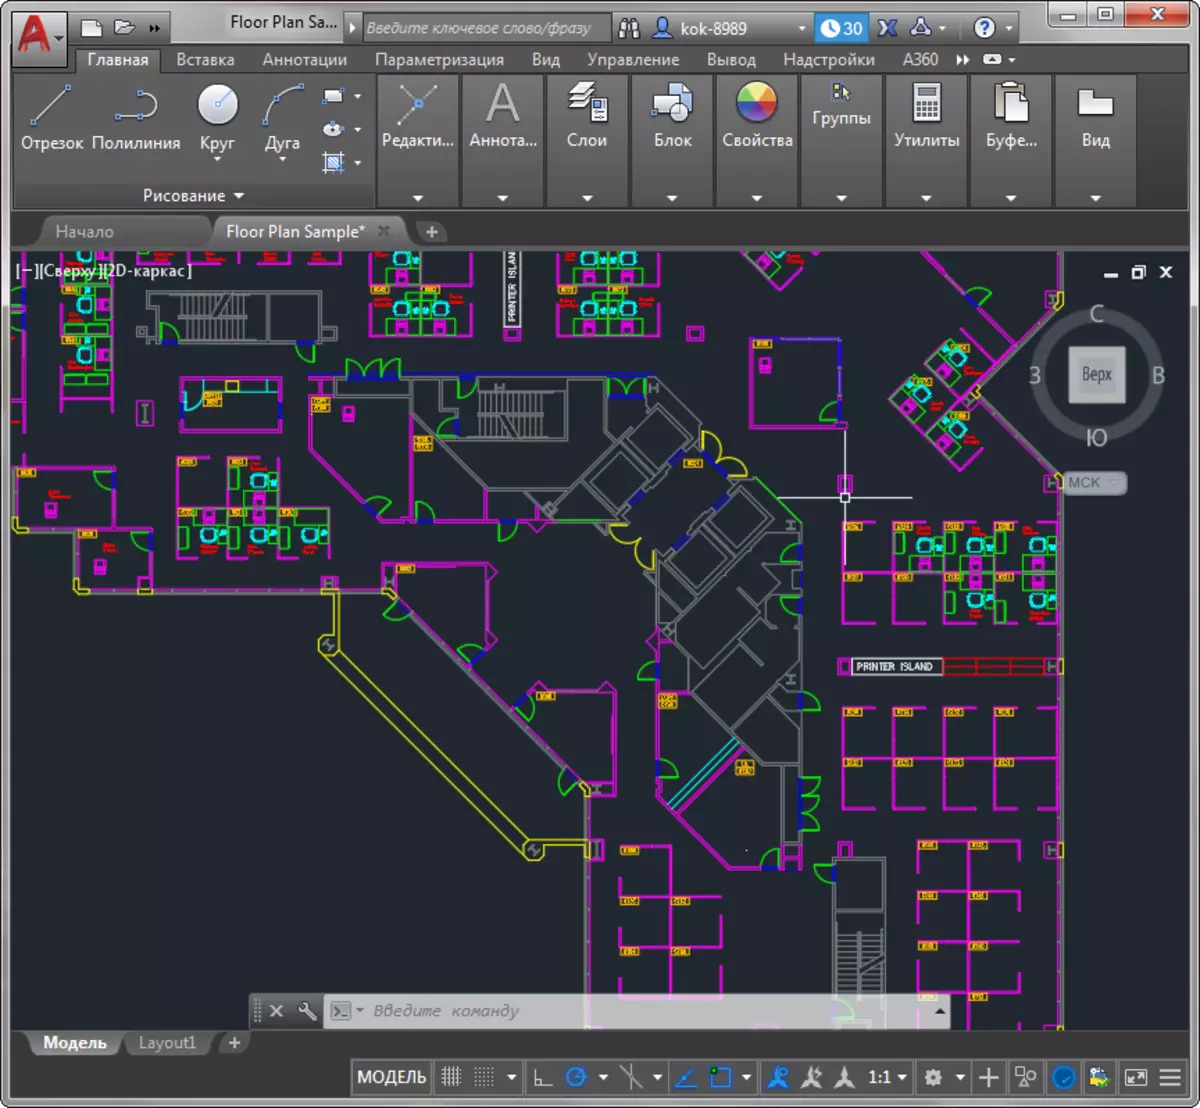 Endrika in Autocad.